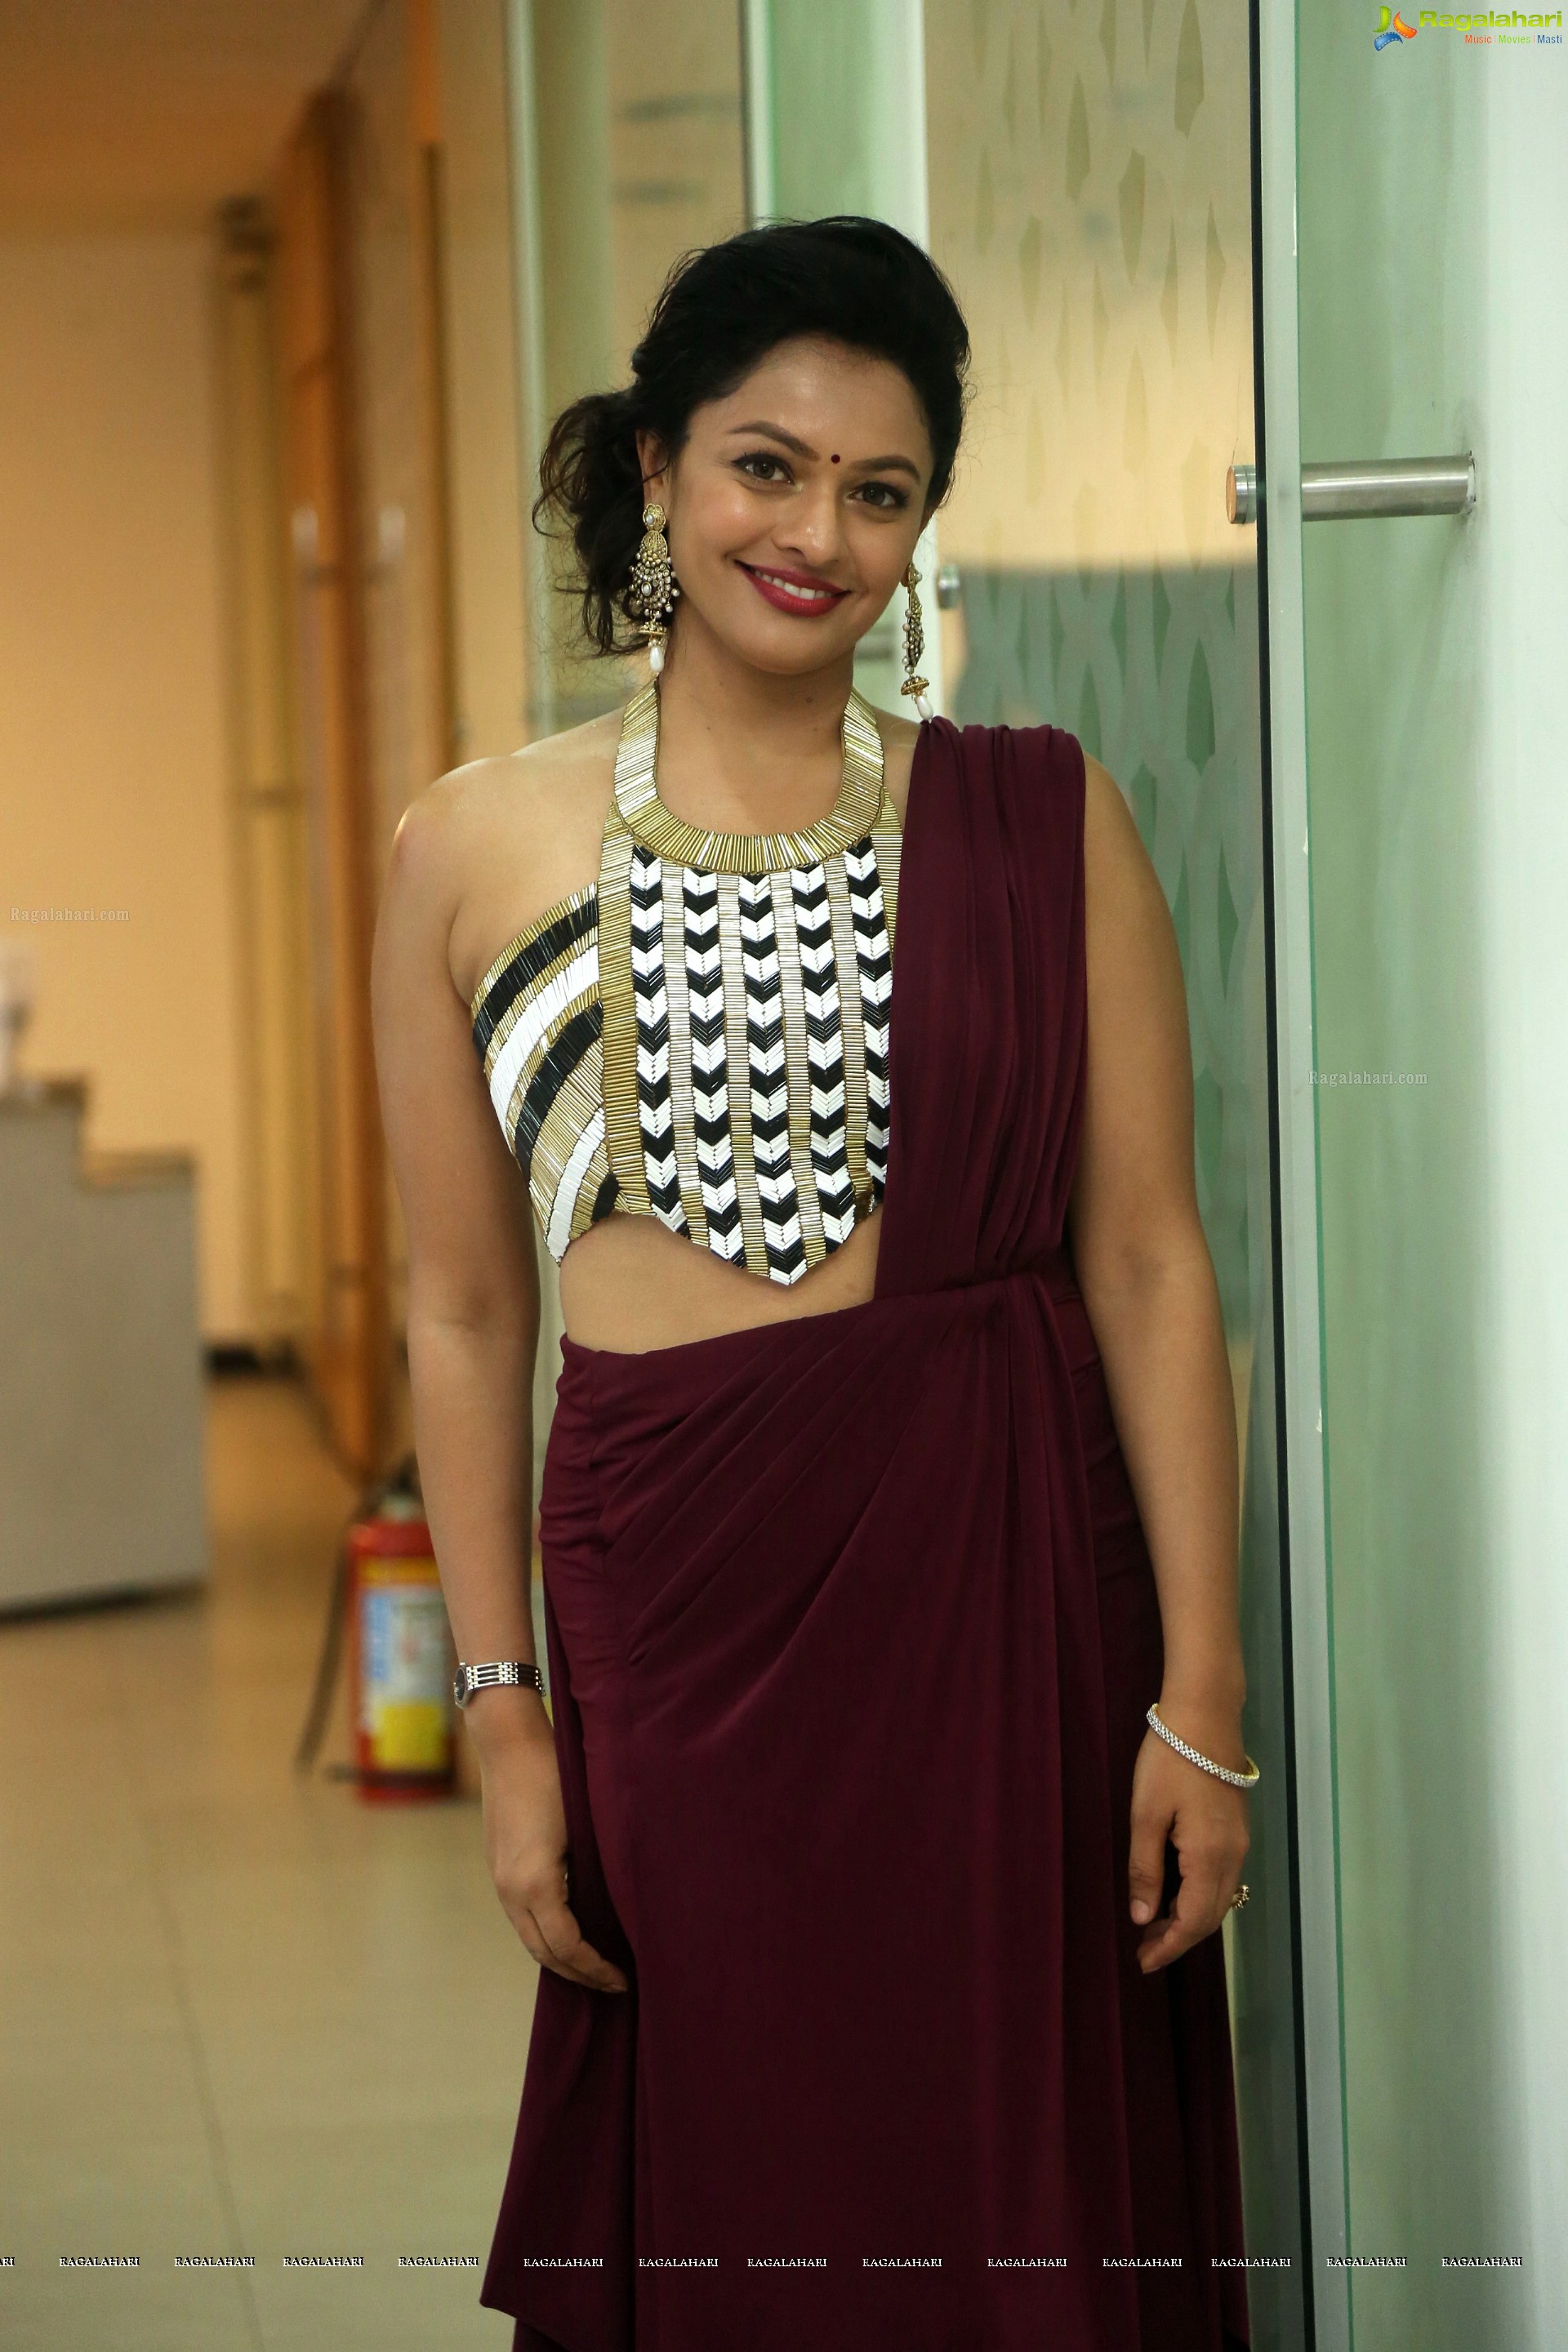 Pooja Kumar at Cake Mixing Ceremony (High Definition)